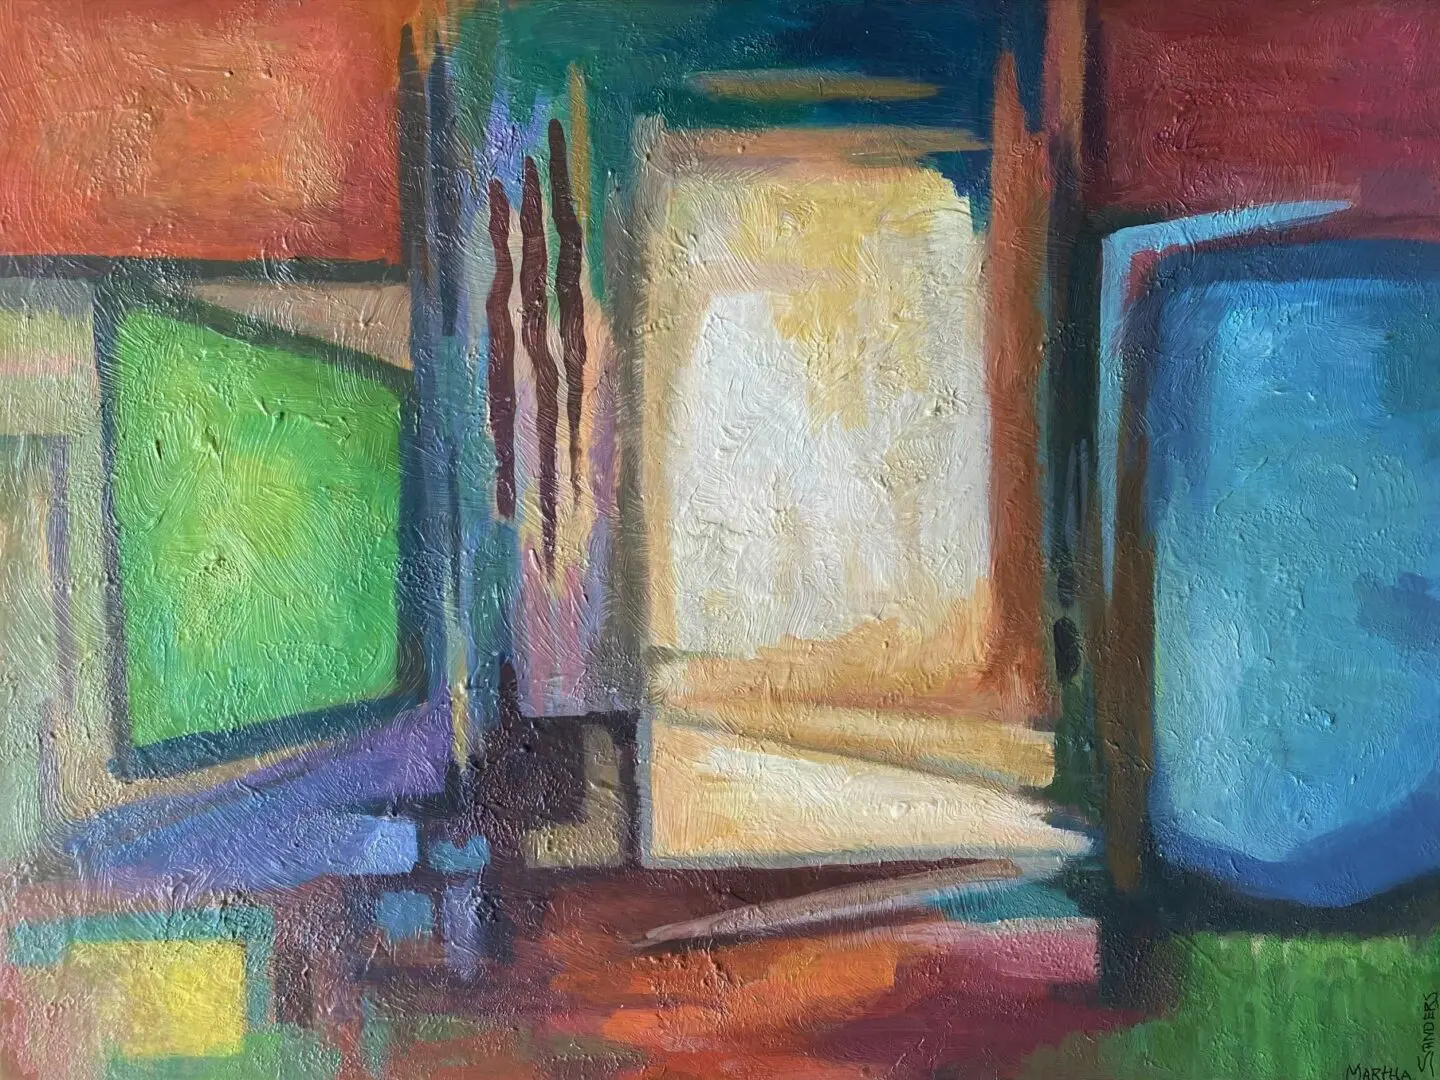 A painting of an open doorway with colorful abstract shapes.